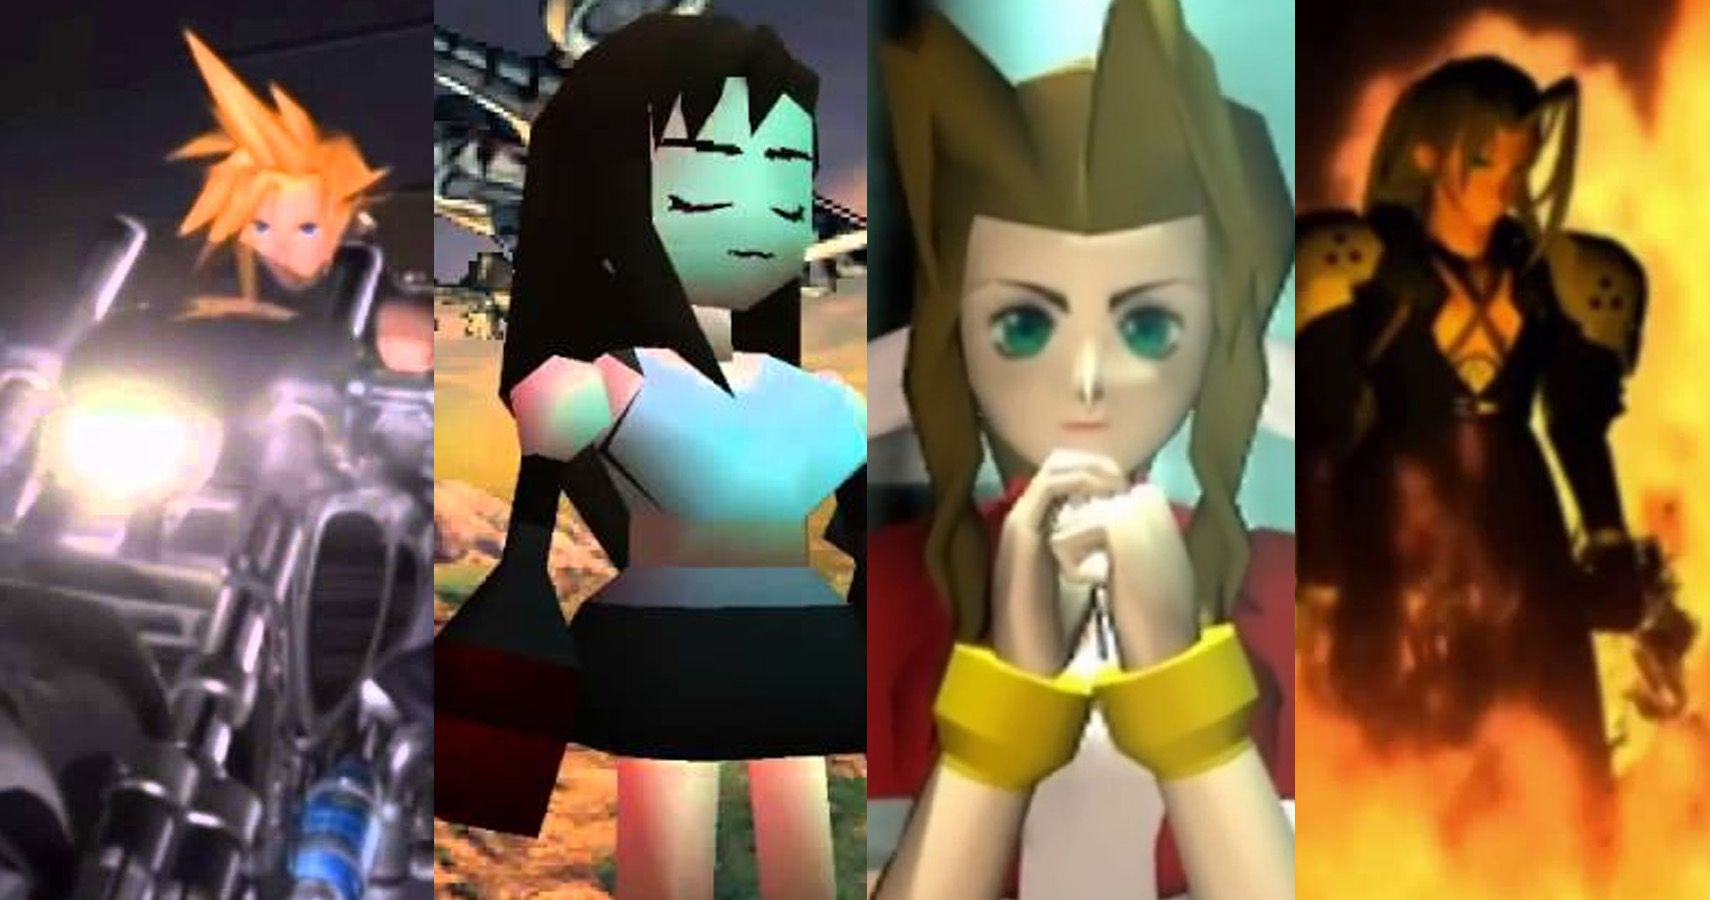 10 Behind-The-Scenes Facts You Didn't Know About Final Fantasy 7